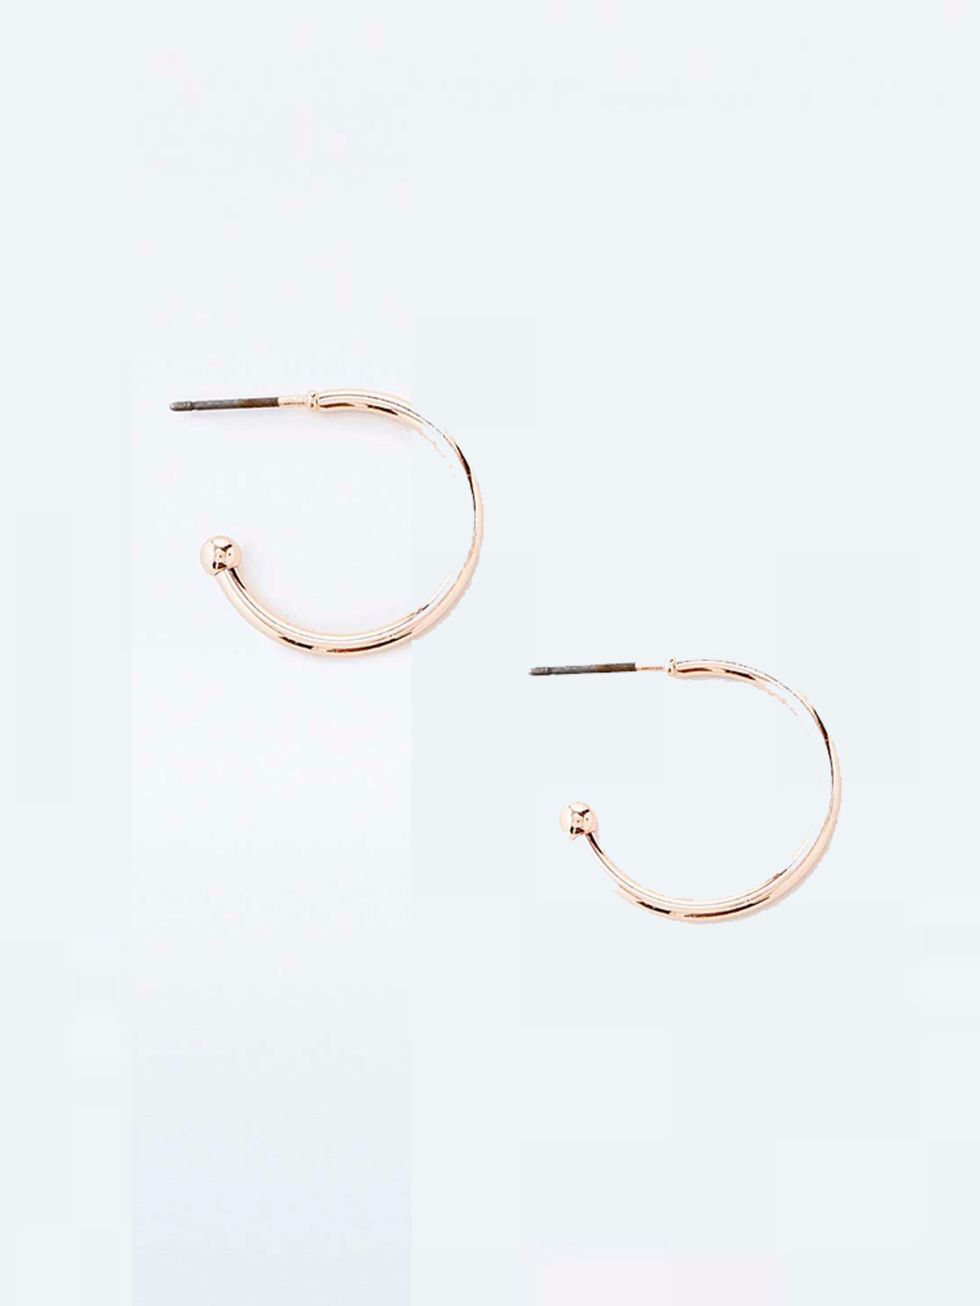 <p><a href="http://www.urbanoutfitters.com/uk/catalog/productdetail.jsp?id=5761463349101&category=WOMENS-JEWELLERY-WATCHES-EU" target="_blank">Urban Outfitters</a> earrings, £6</p>